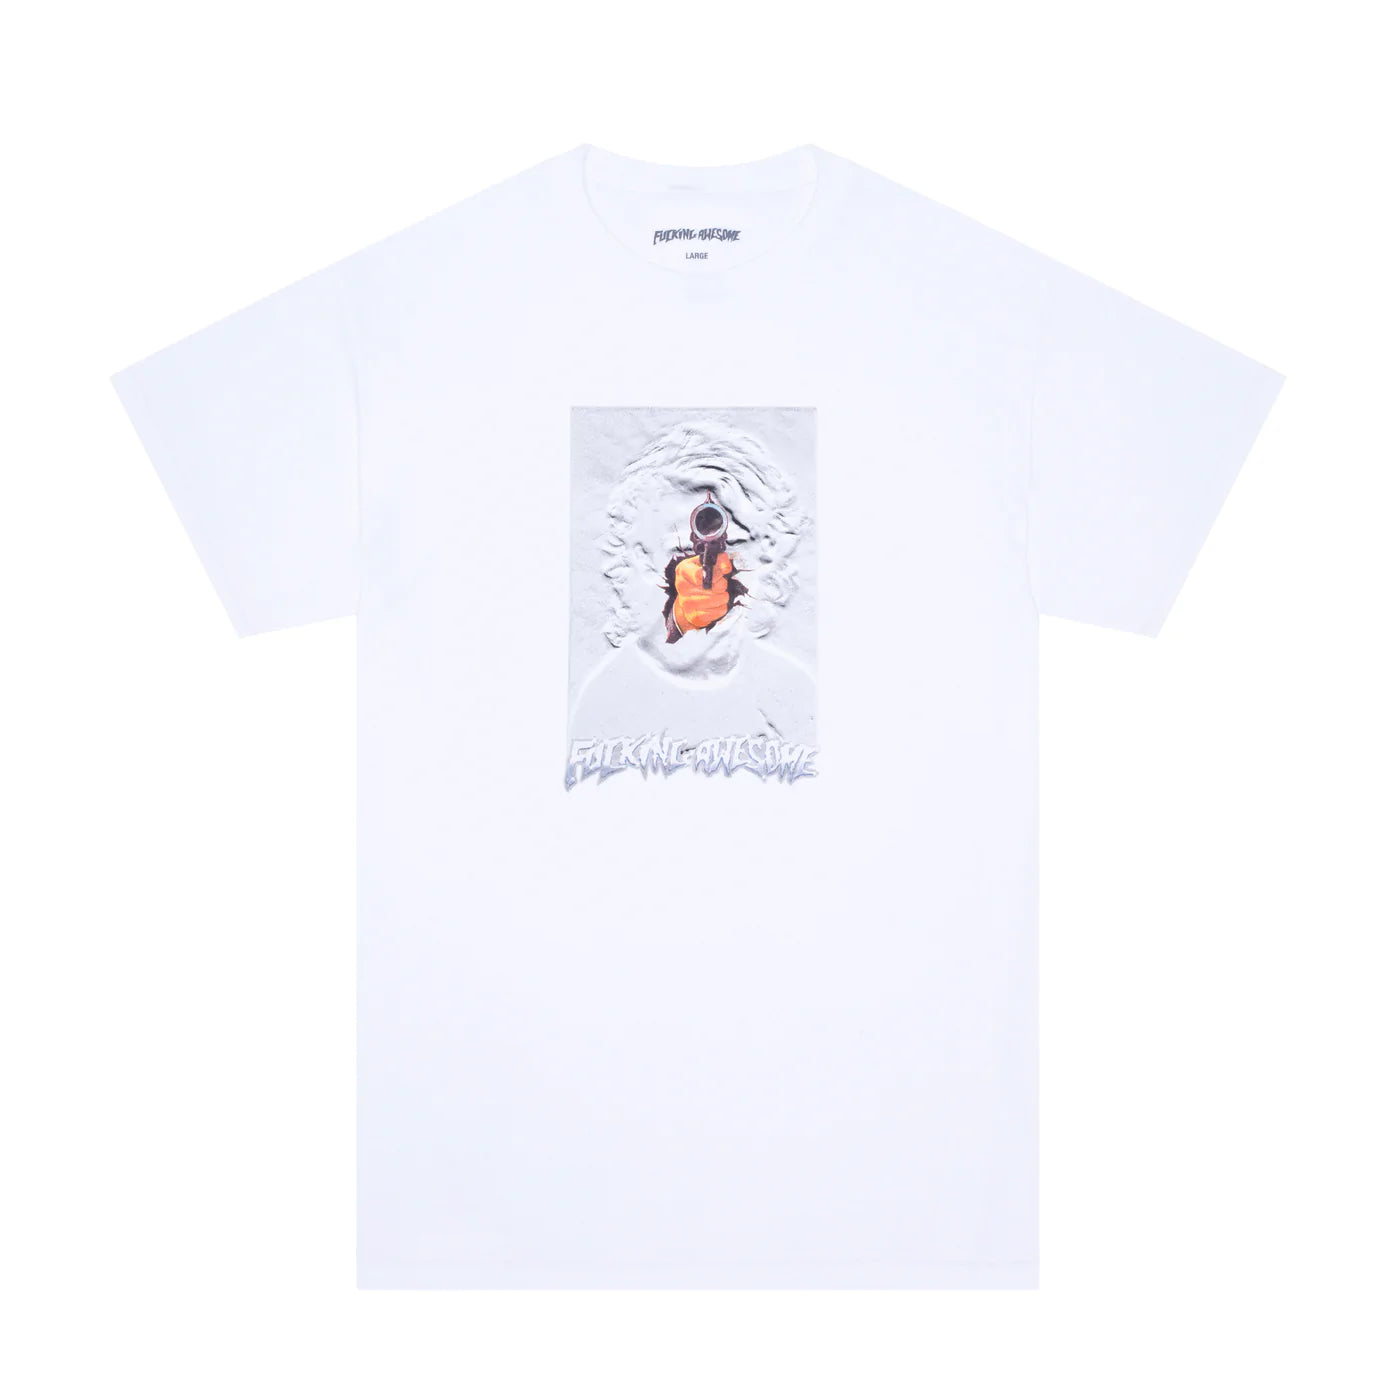 Dill Break Through s/s Tee Wht(size options listed)